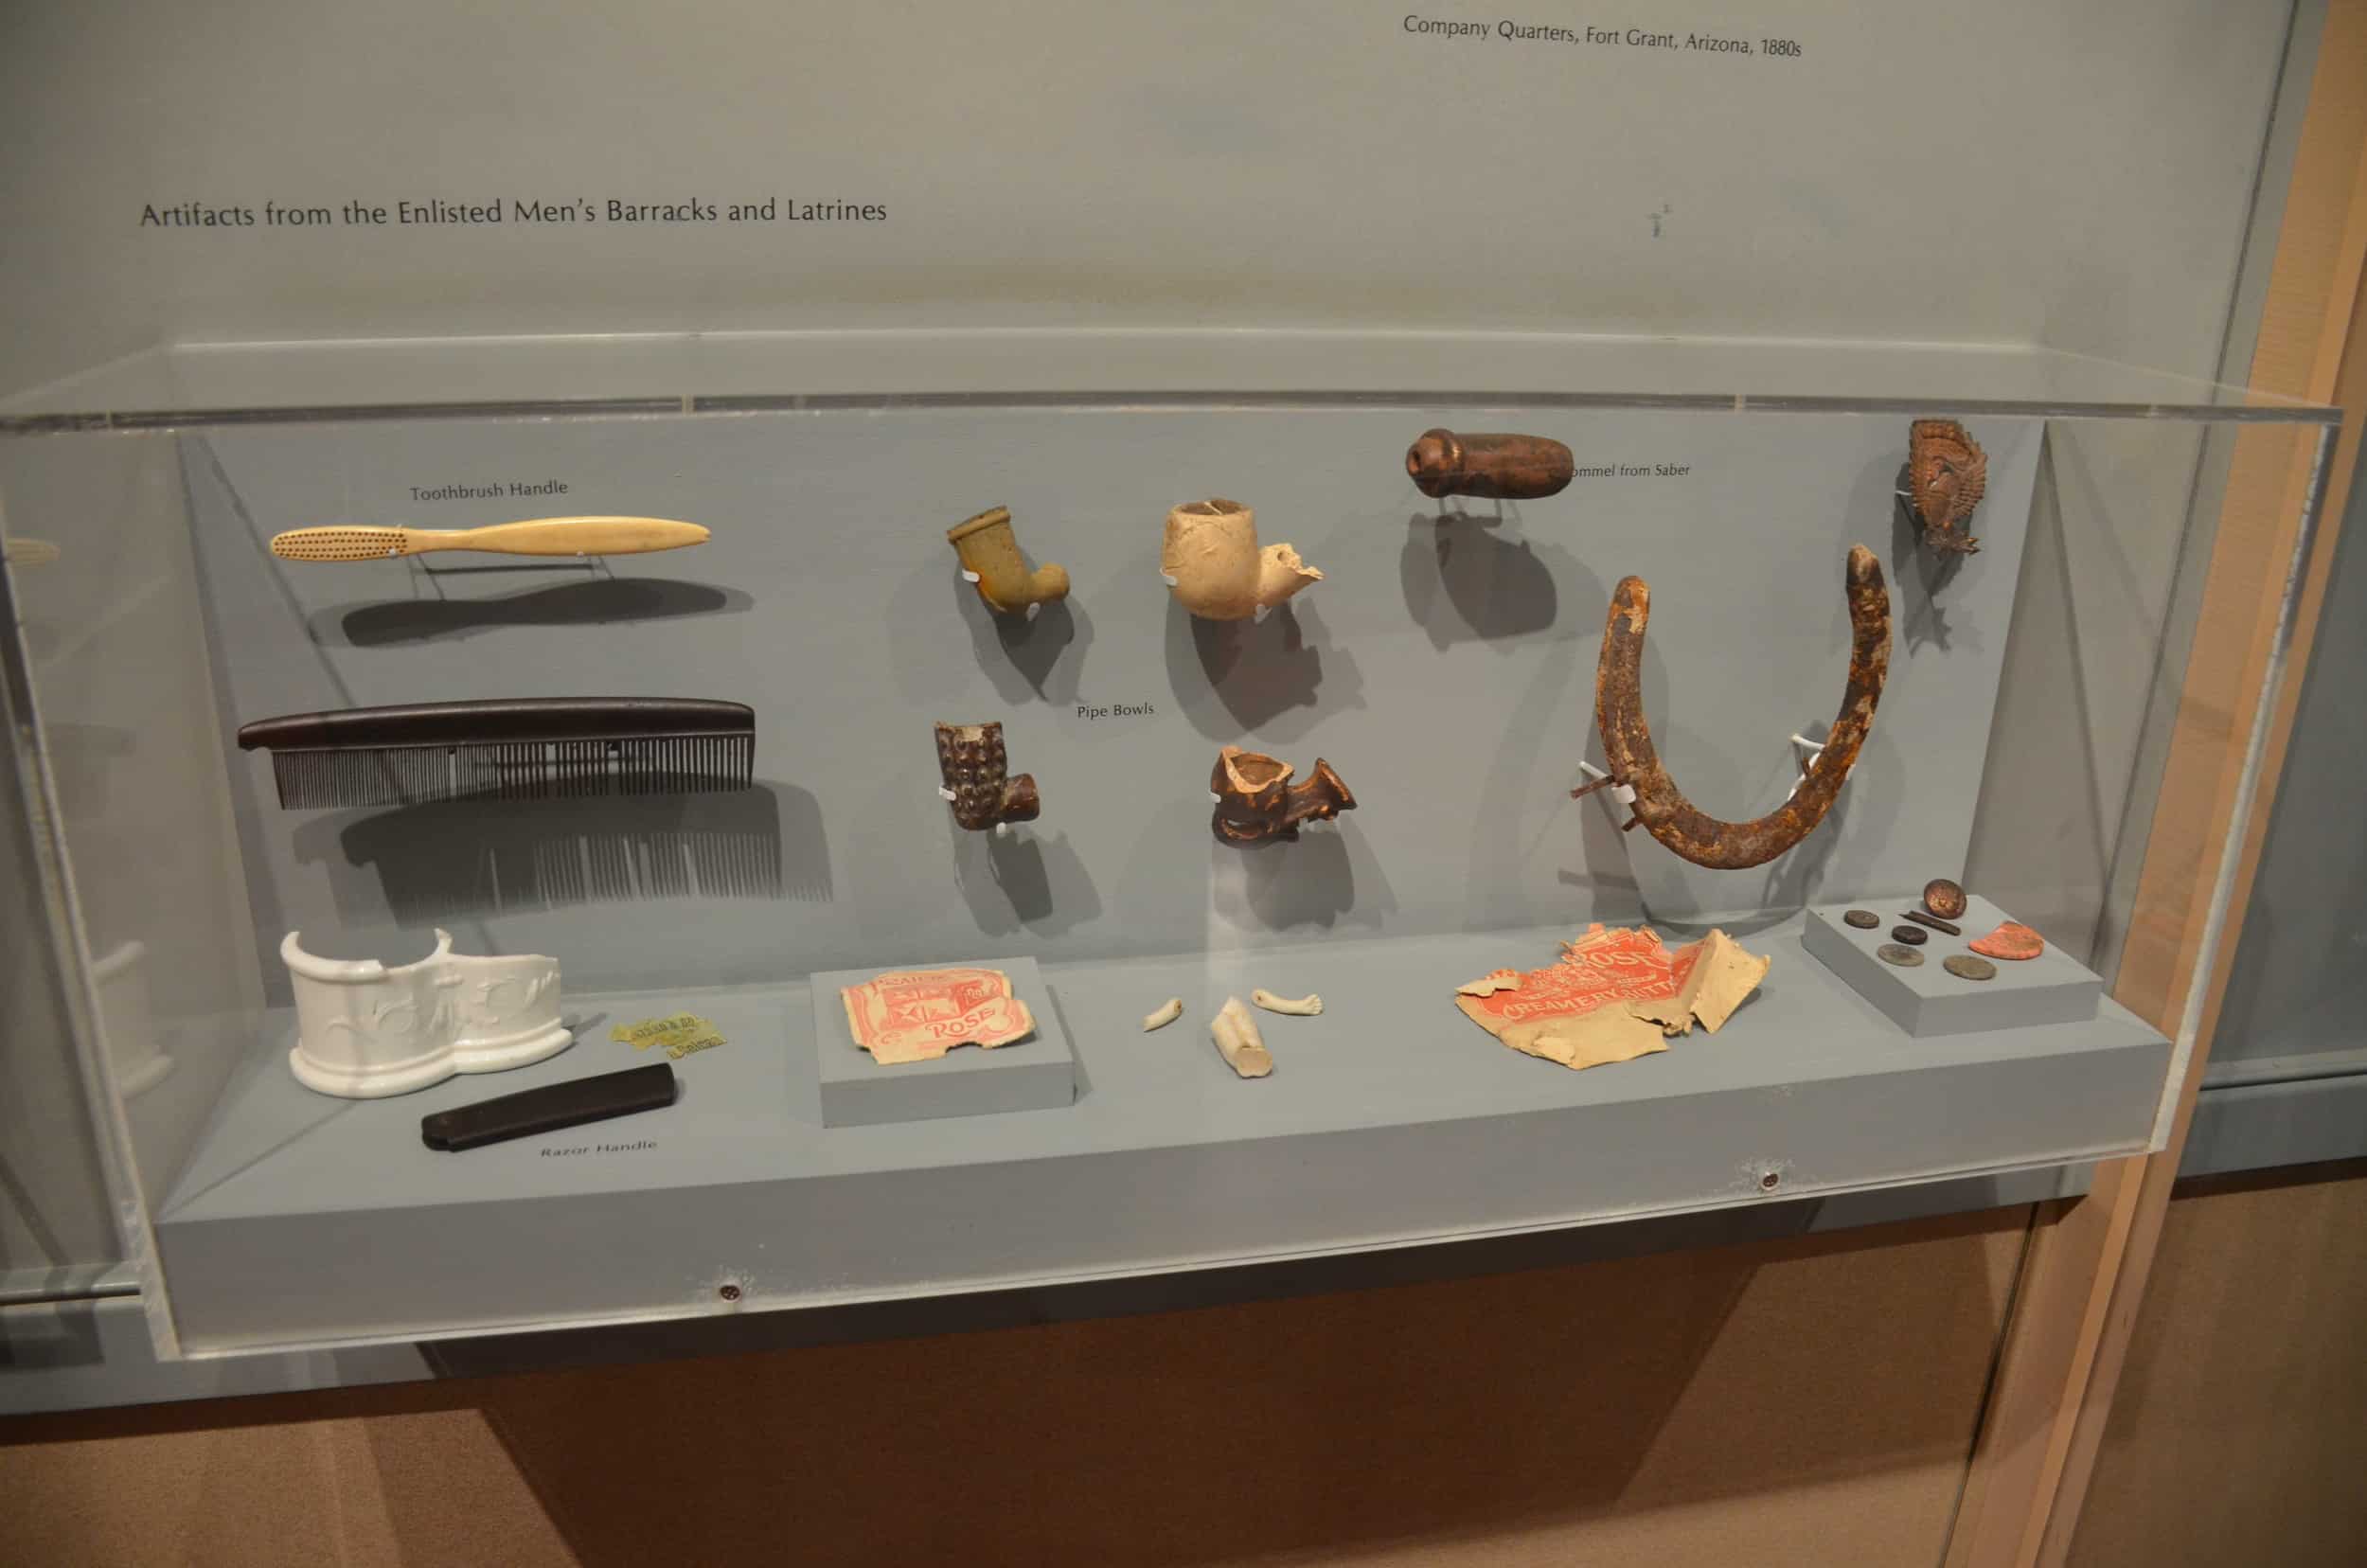 Artifacts from the Enlisted Men's Barracks and Latrines at Fort Selden Historic Site in New Mexico